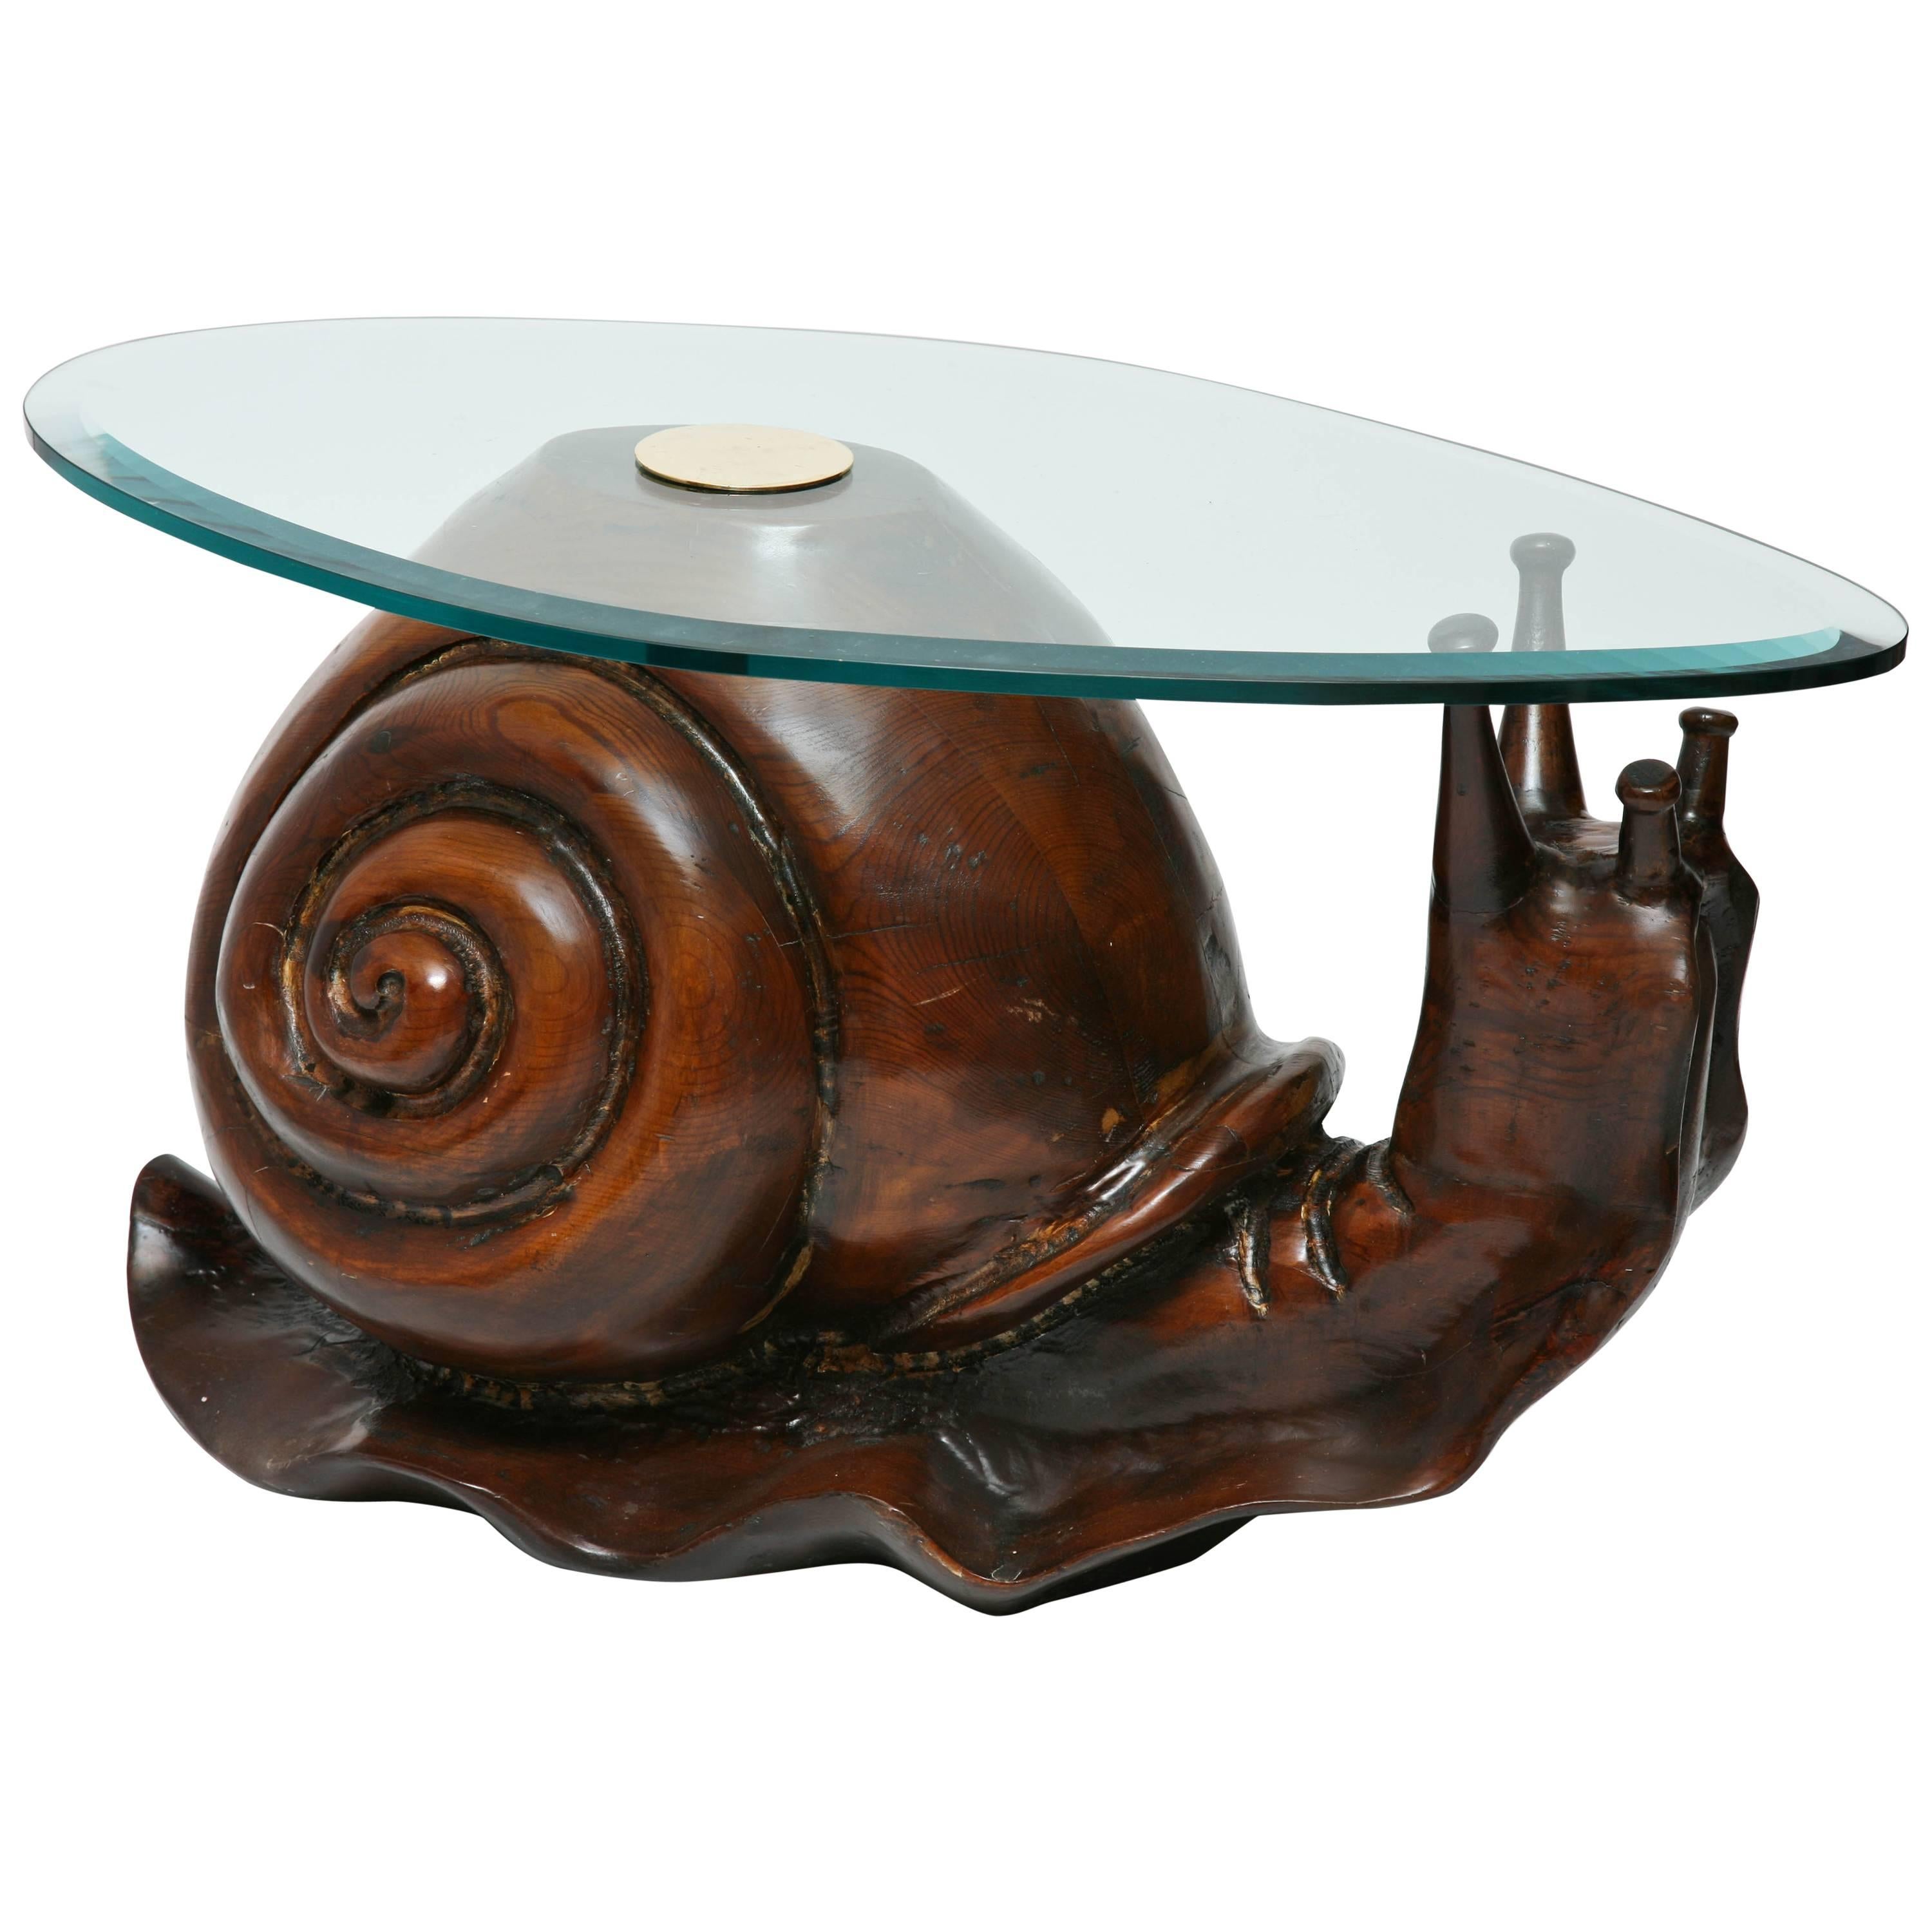 Carved Wood Snail Sculpture Table by Federico Armijo